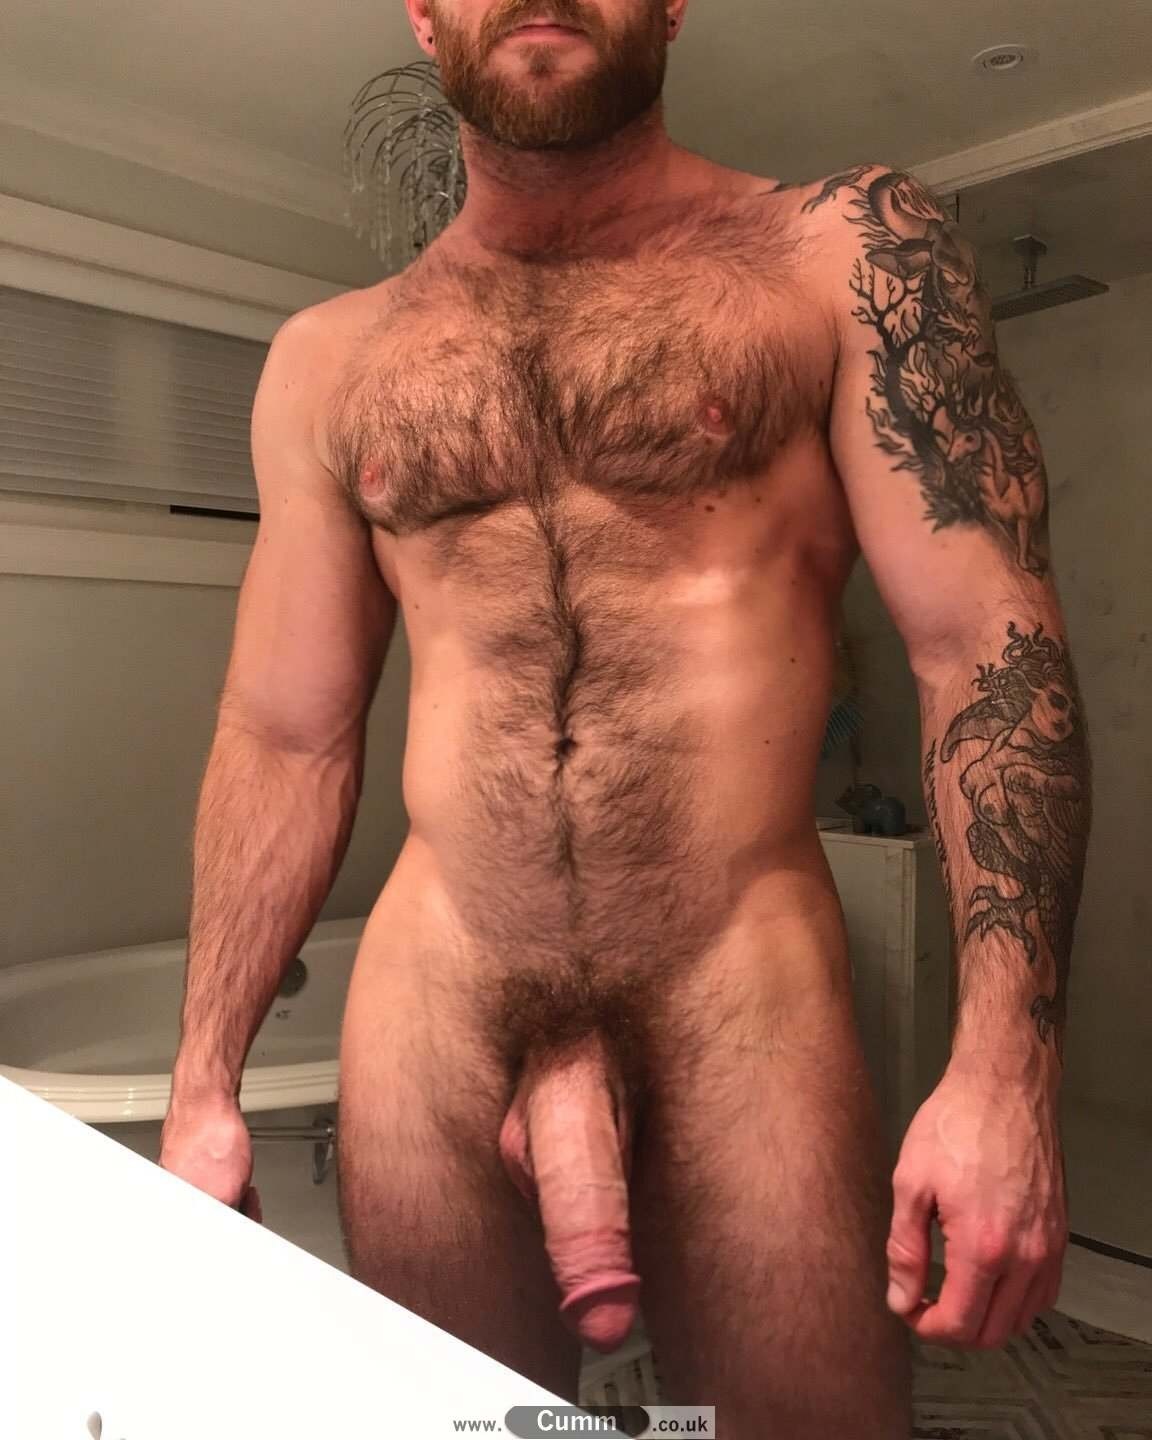 Naked Guy Shows His Hairy Penis (46 photos)